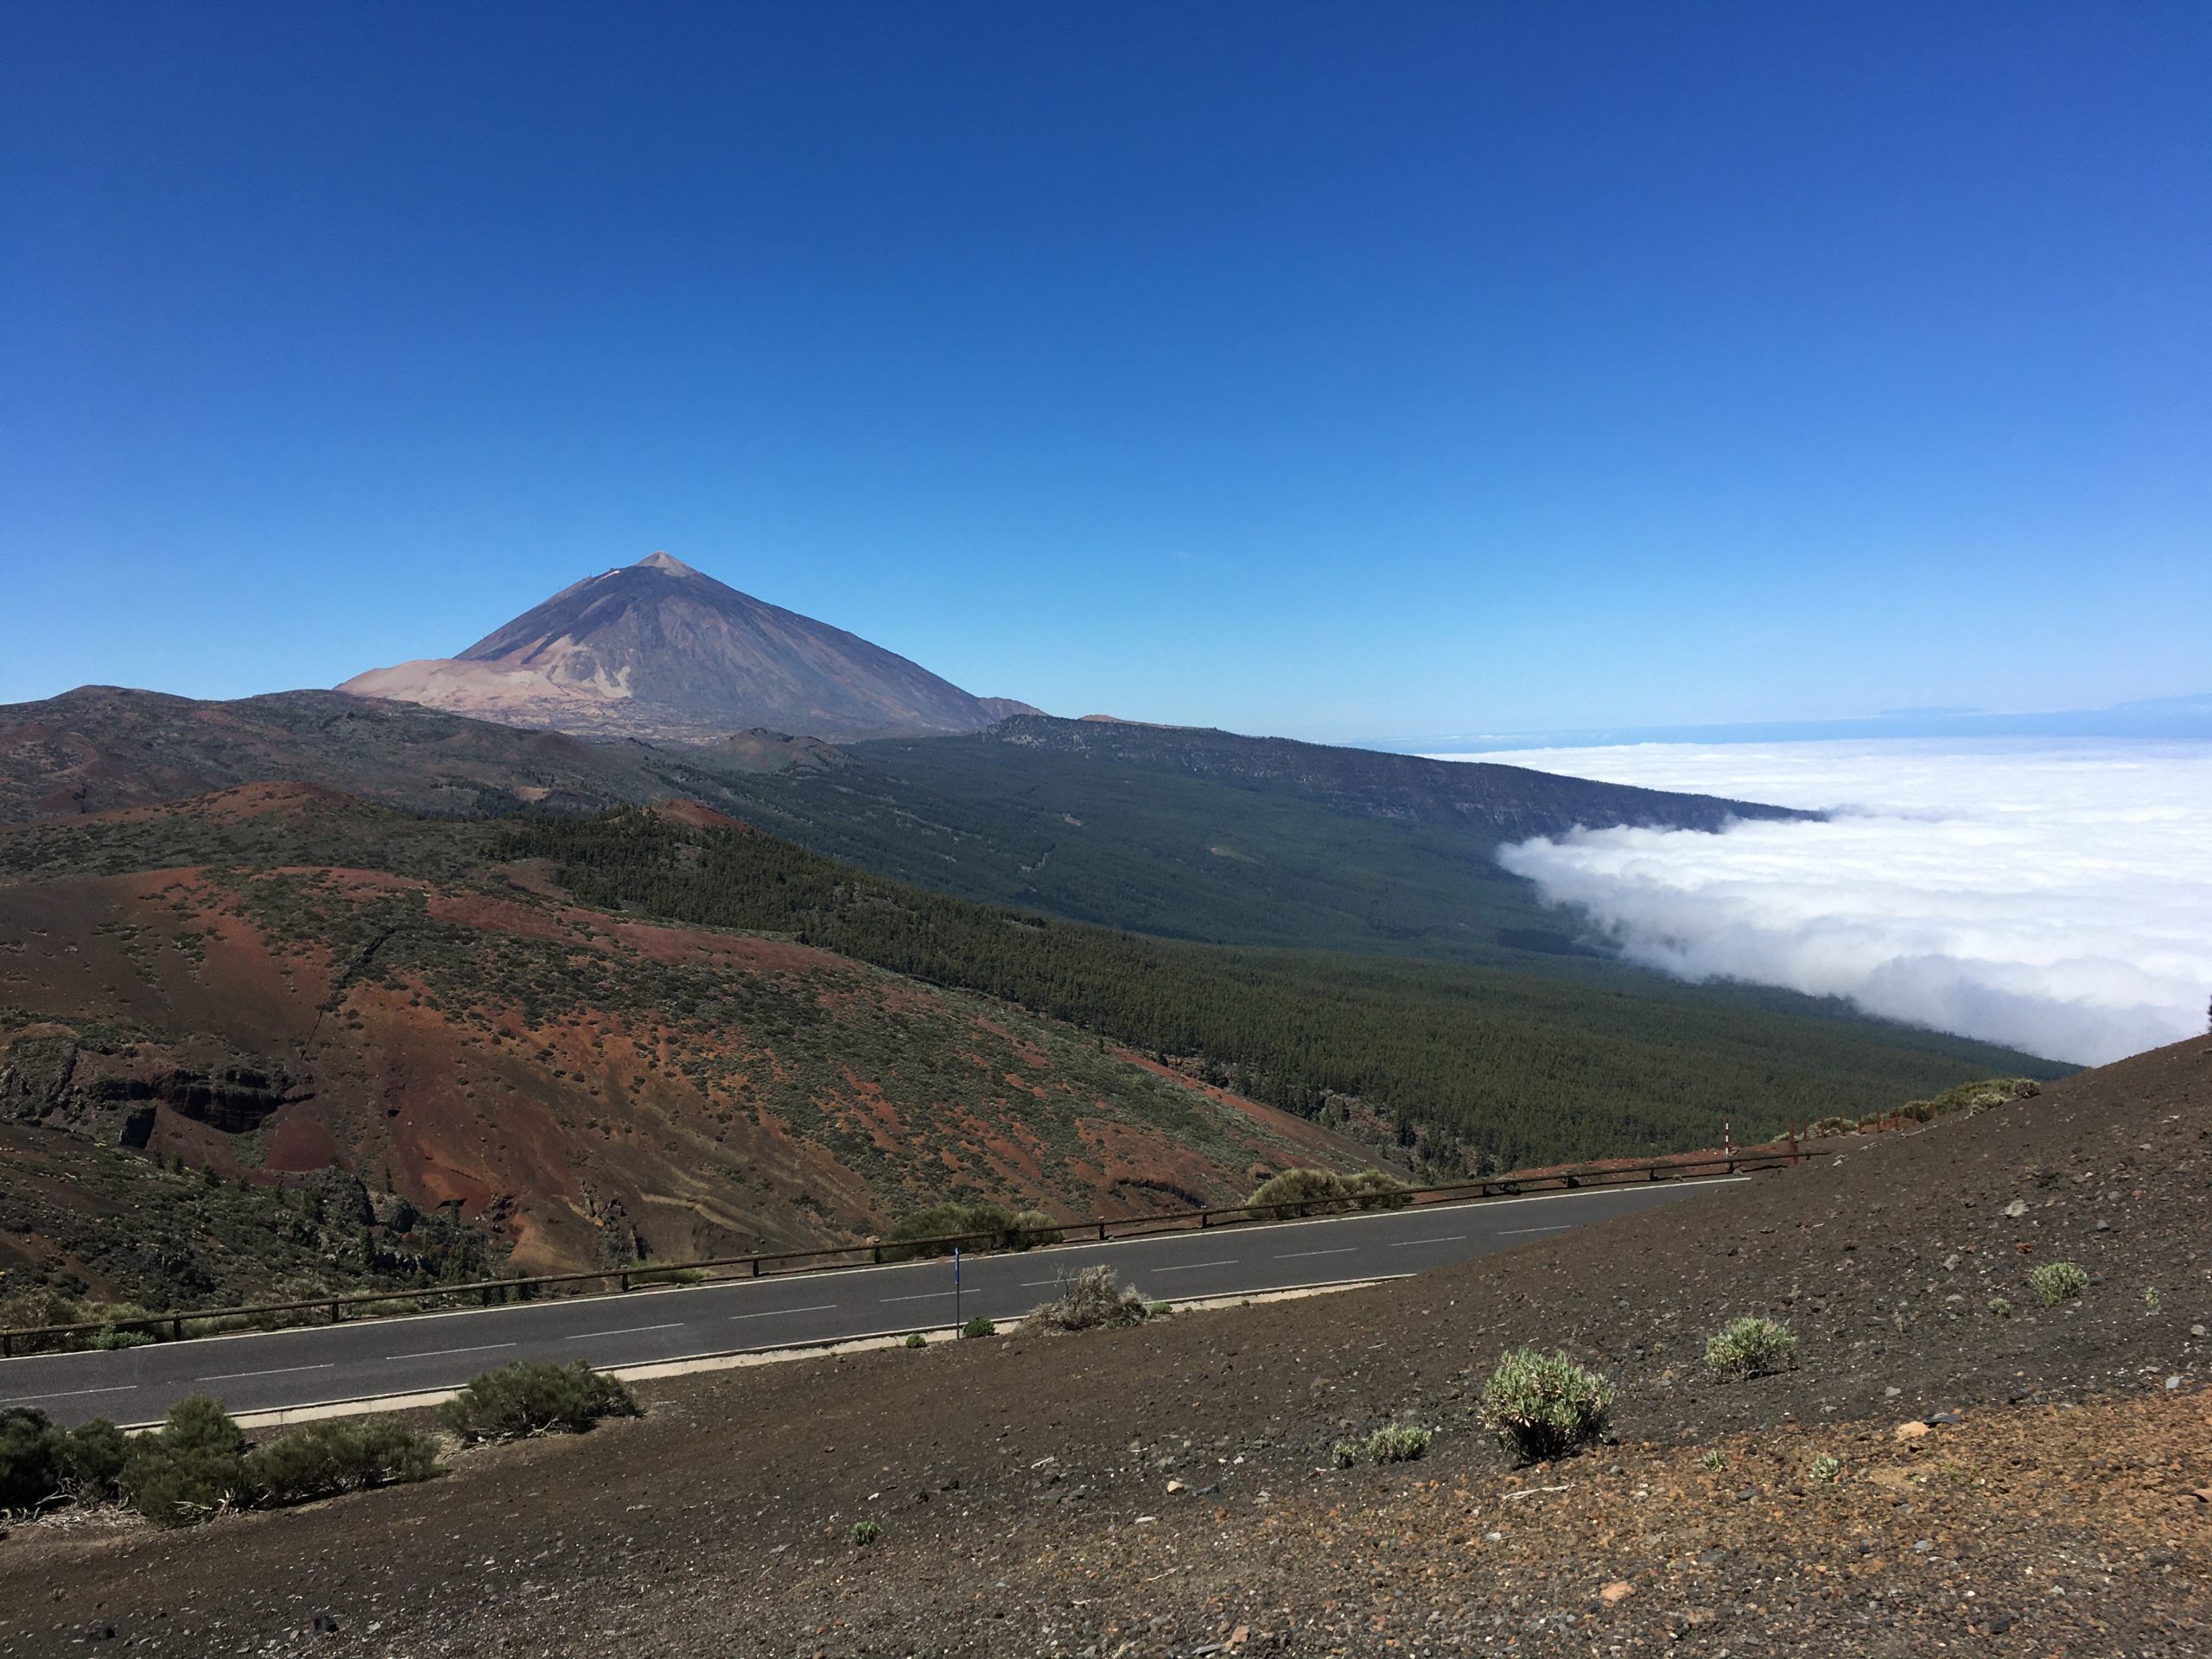 Looking back towards Mount Tiede from La Torta. We are above the clouds!